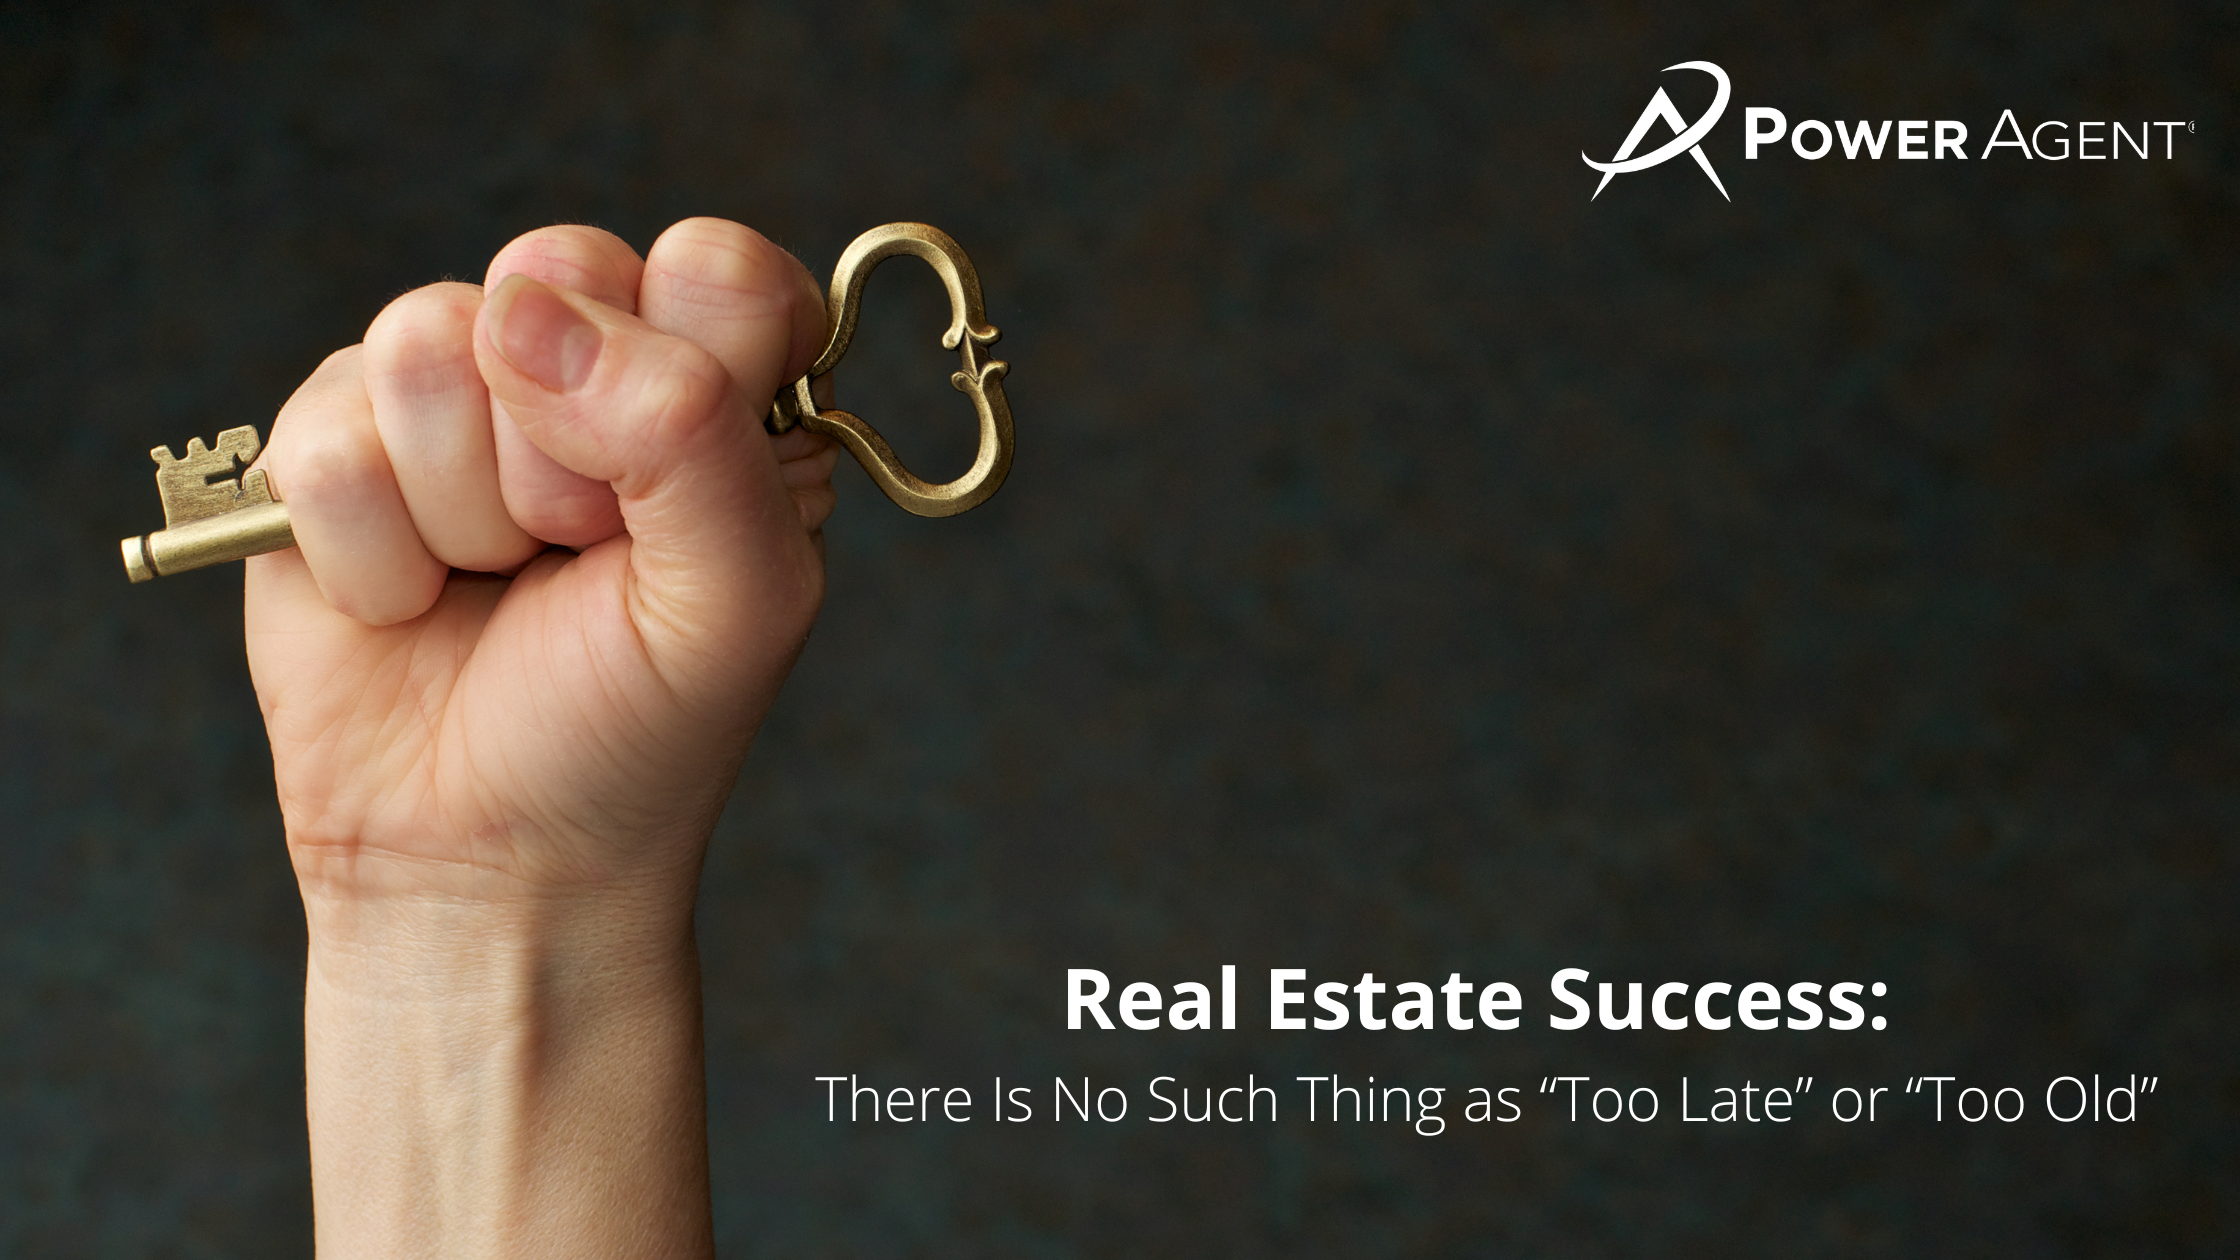 Real Estate Success: There Is No Such Thing as “Too Late” or “Too Old”